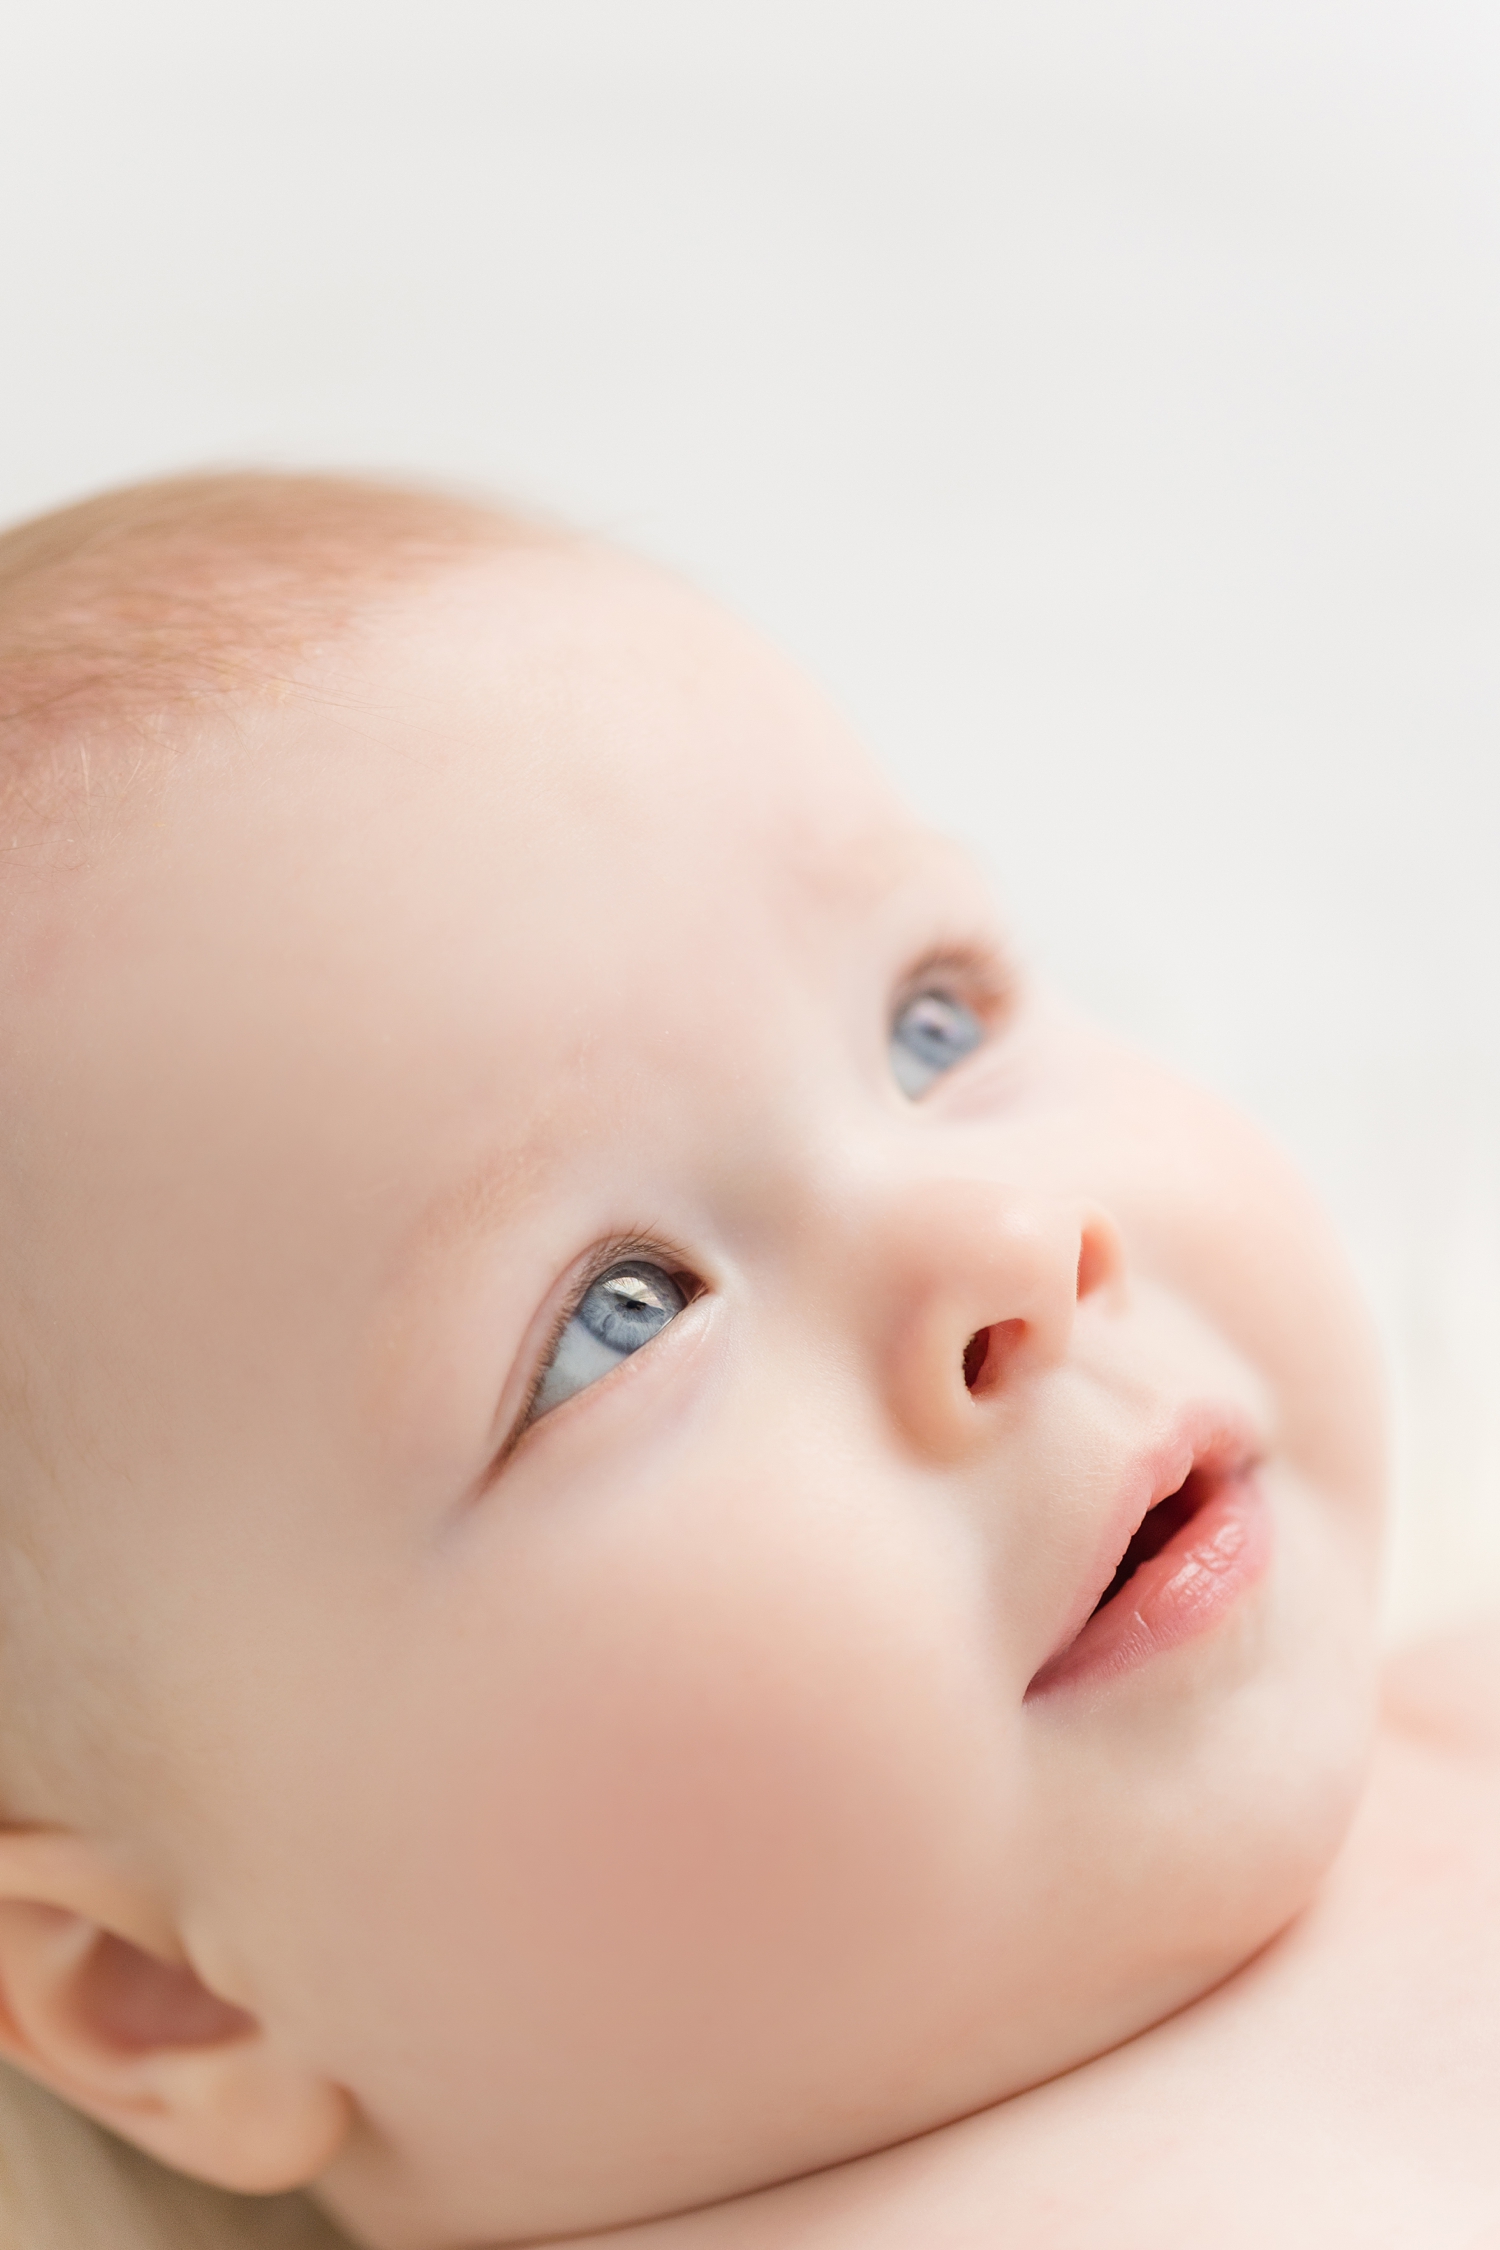 Baby Shae's profile as she stares at her daddy | CB Studio